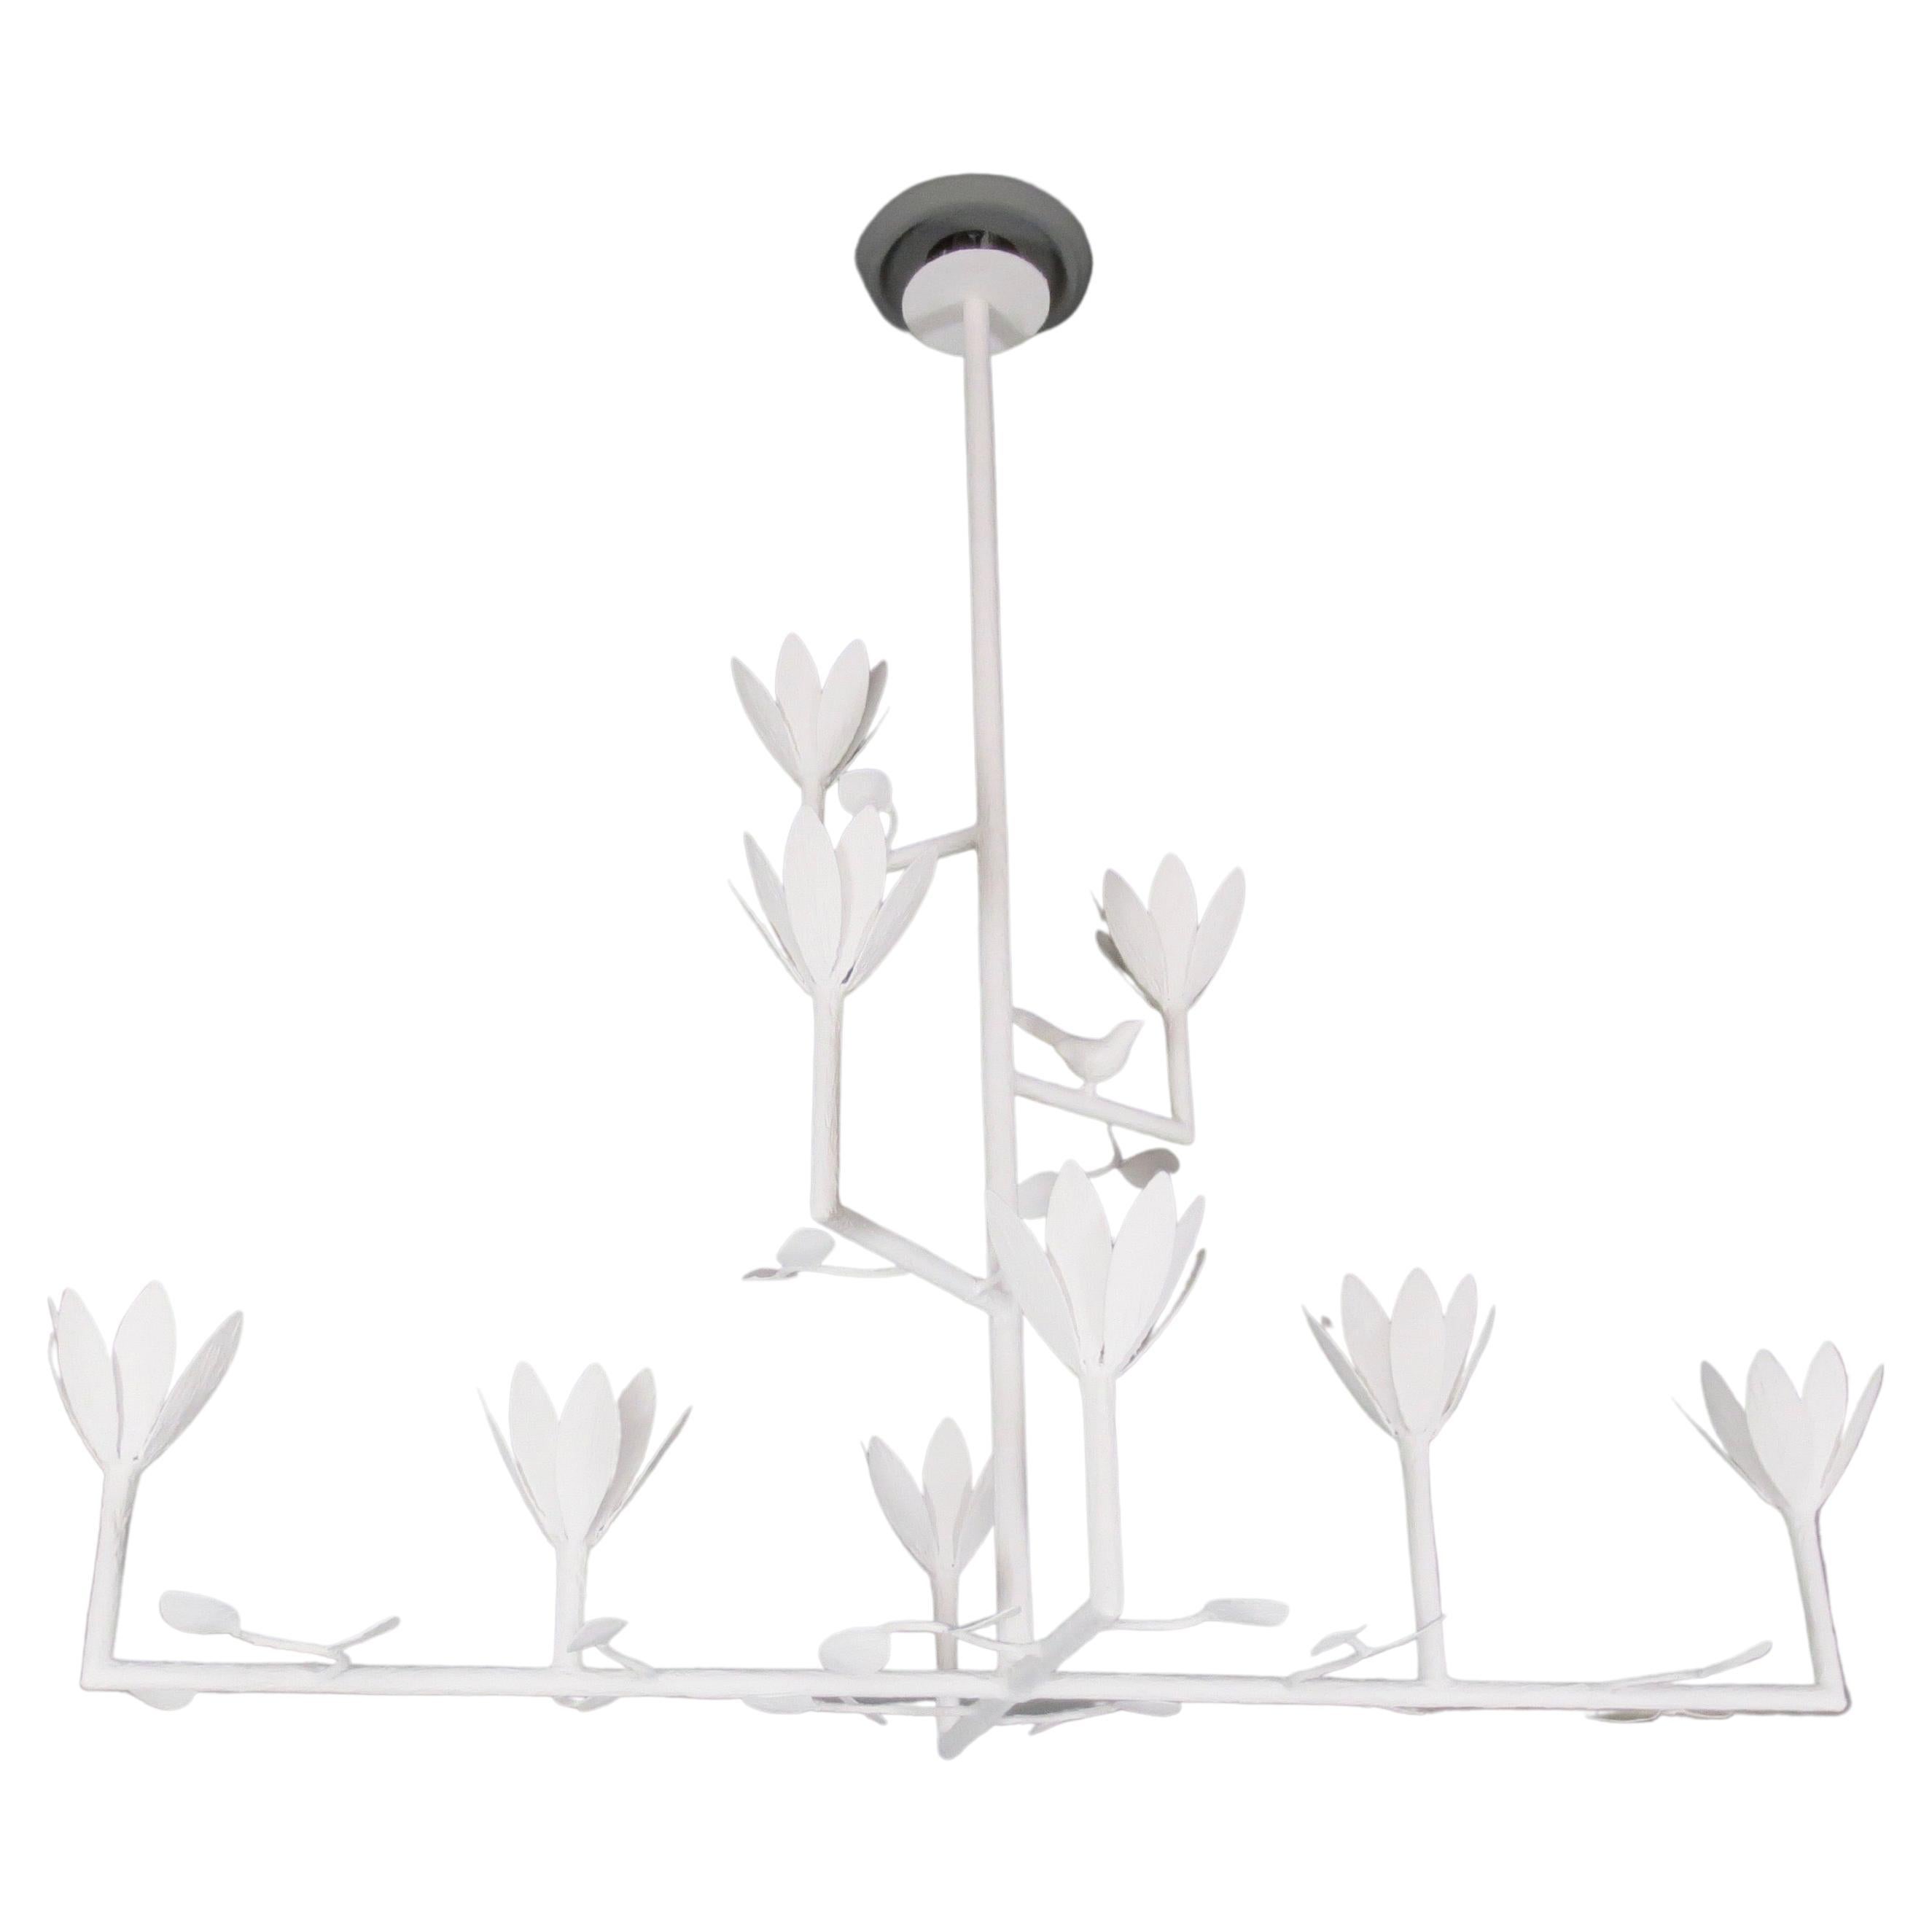 9 Bloom Cross Bar Plaster Chandelier with a Bird and Leaves